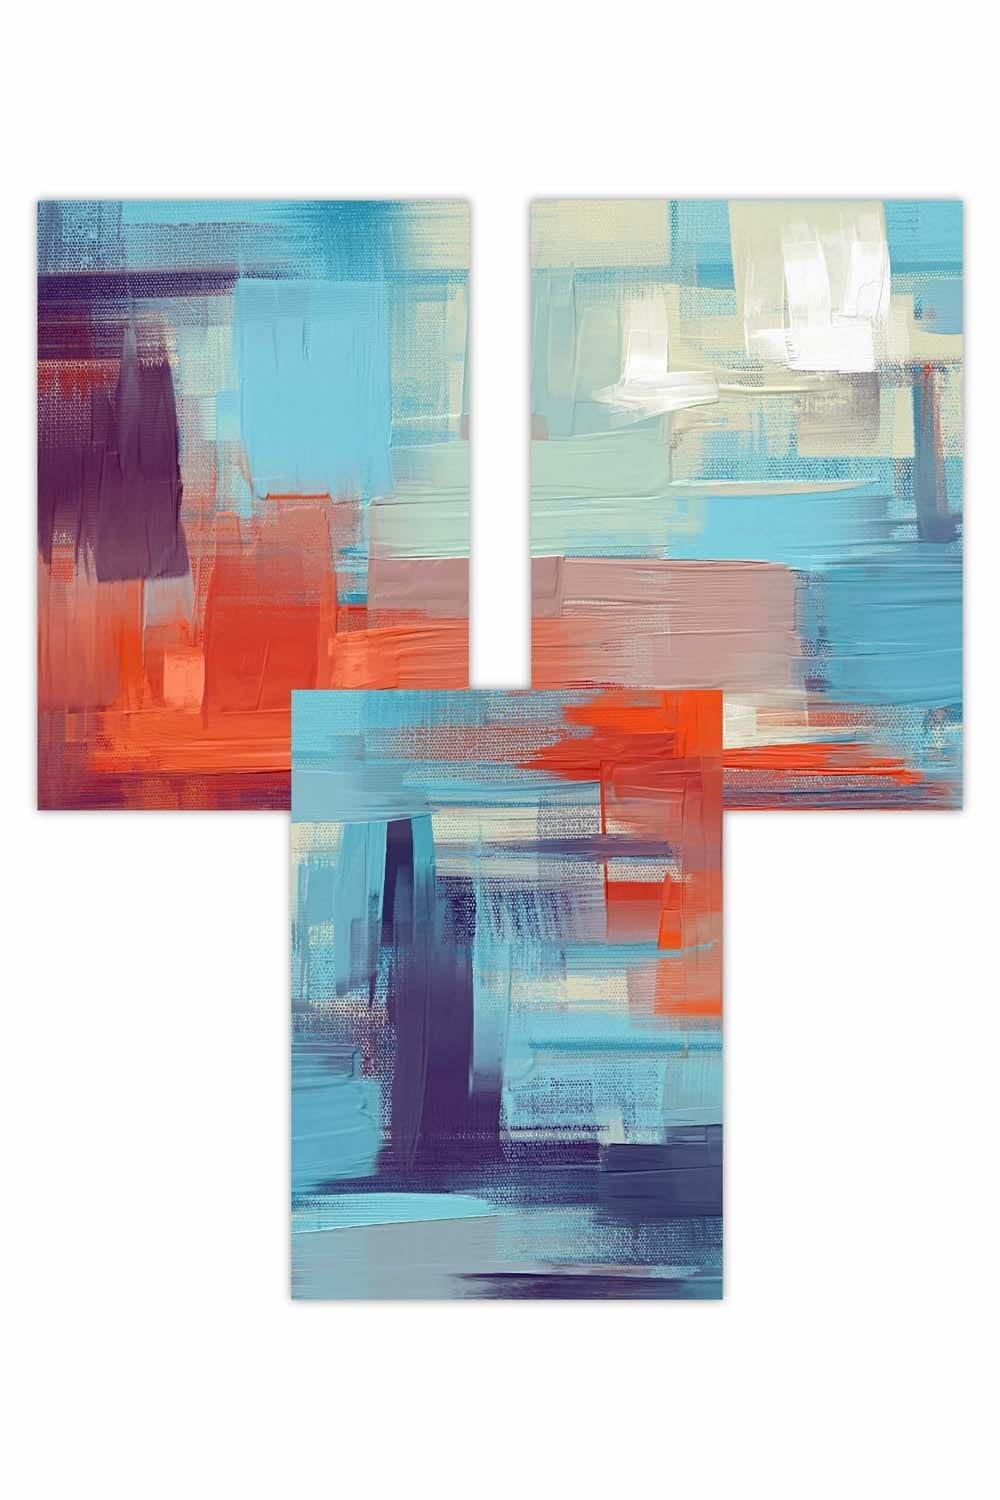 Set of 3 Geometric Abstract Sunset Plaza In Purple,Blue and Orange Art Posters